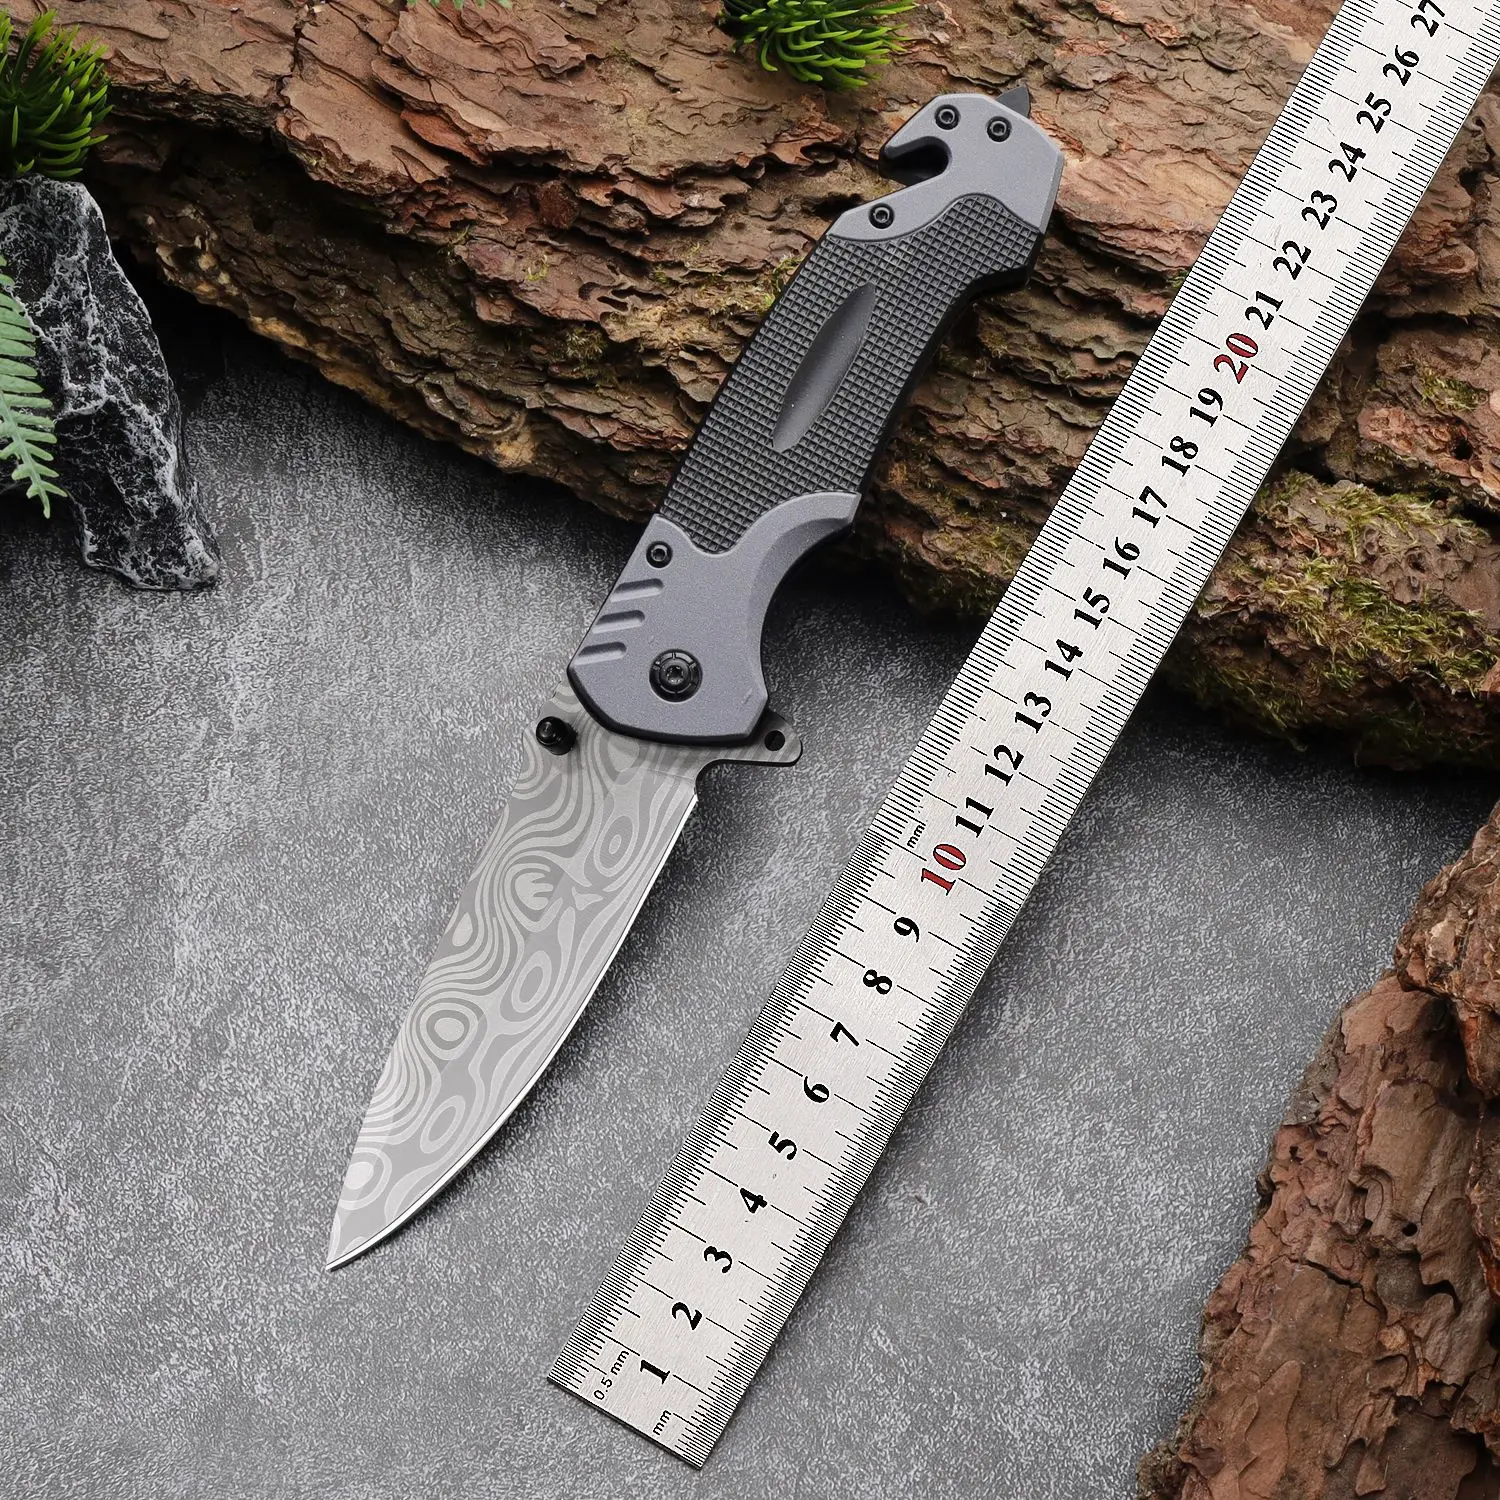 

Outdoor Survival Folding Knife - Compact and Razor-Sharp Stainless Steel Pocket Knife for EDC and Camping